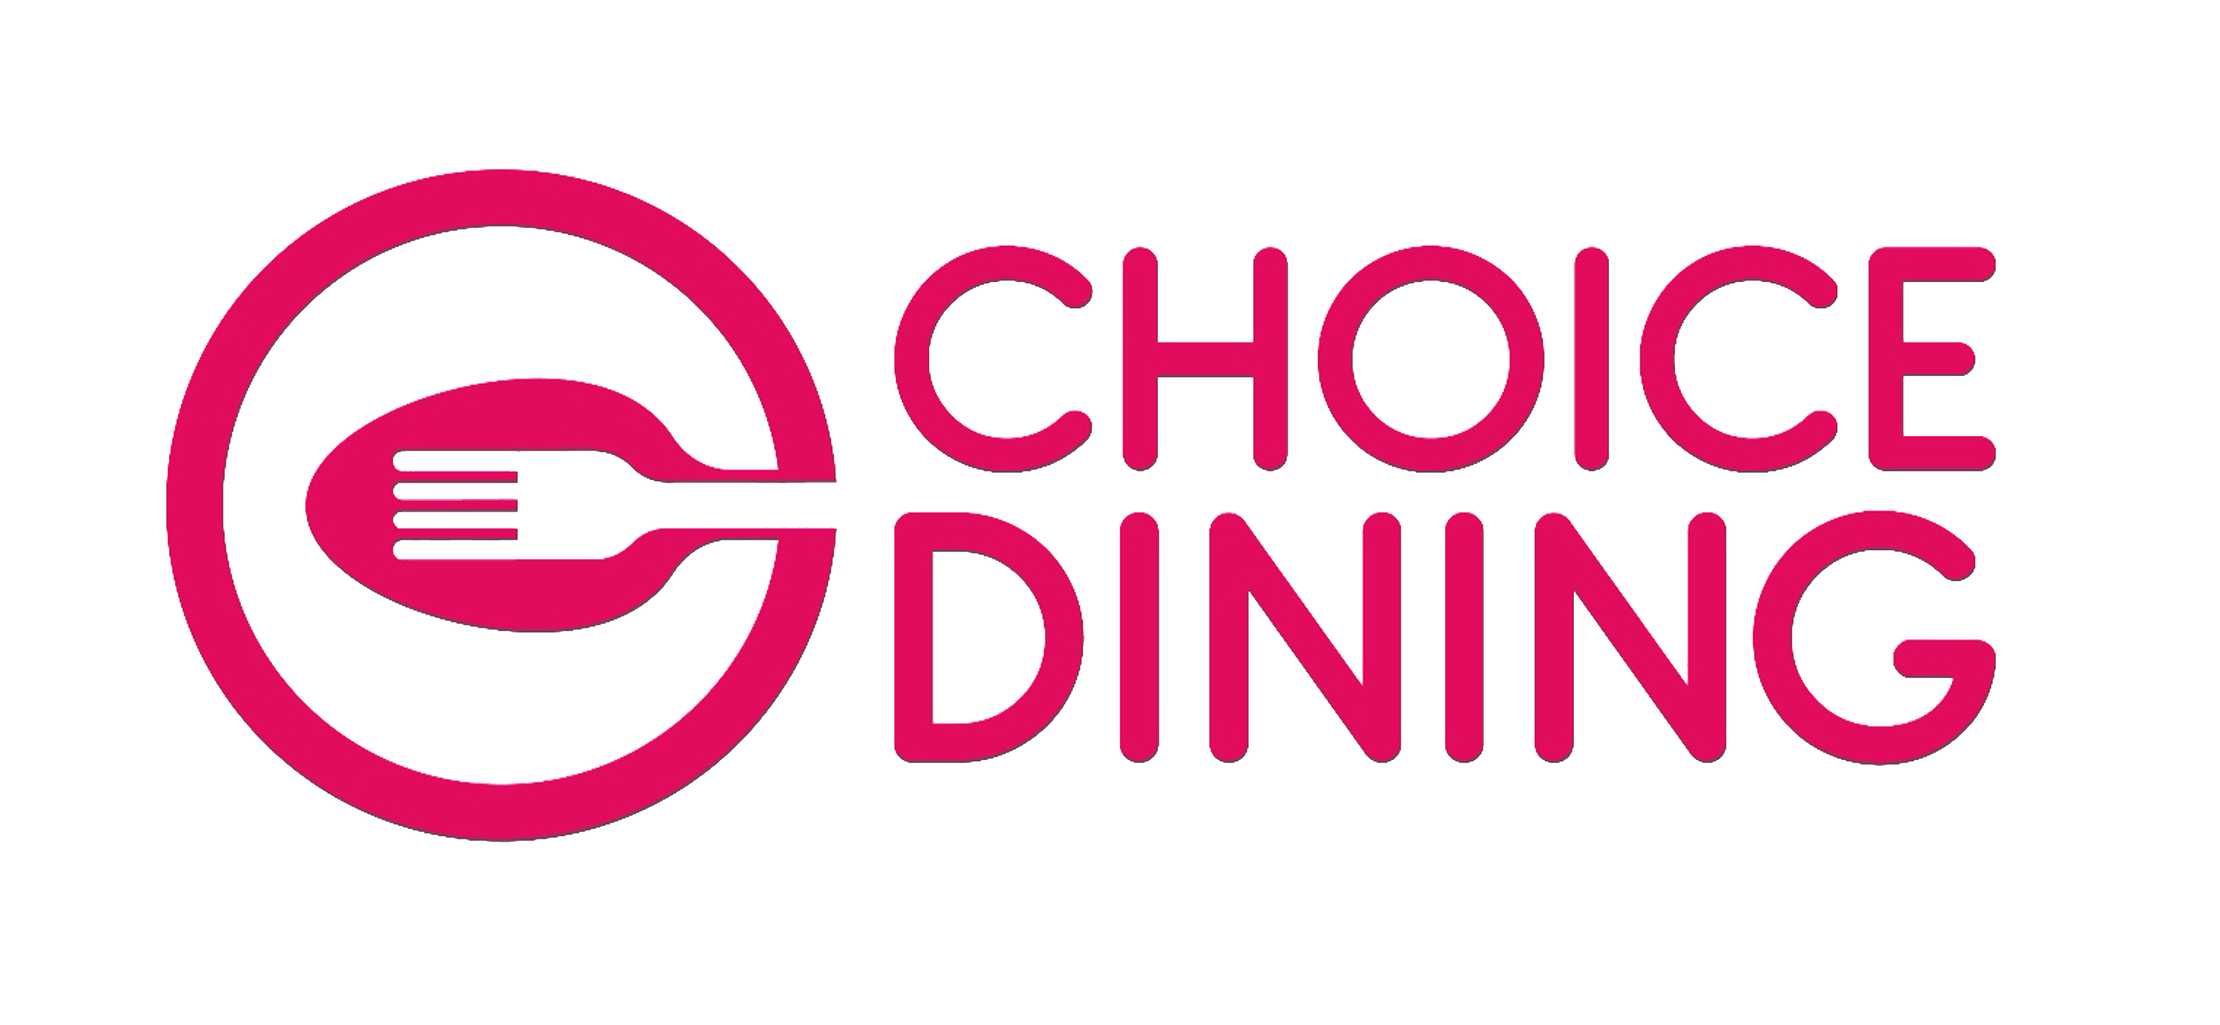 CHOICE Dining is Autumna's care home food accreditation